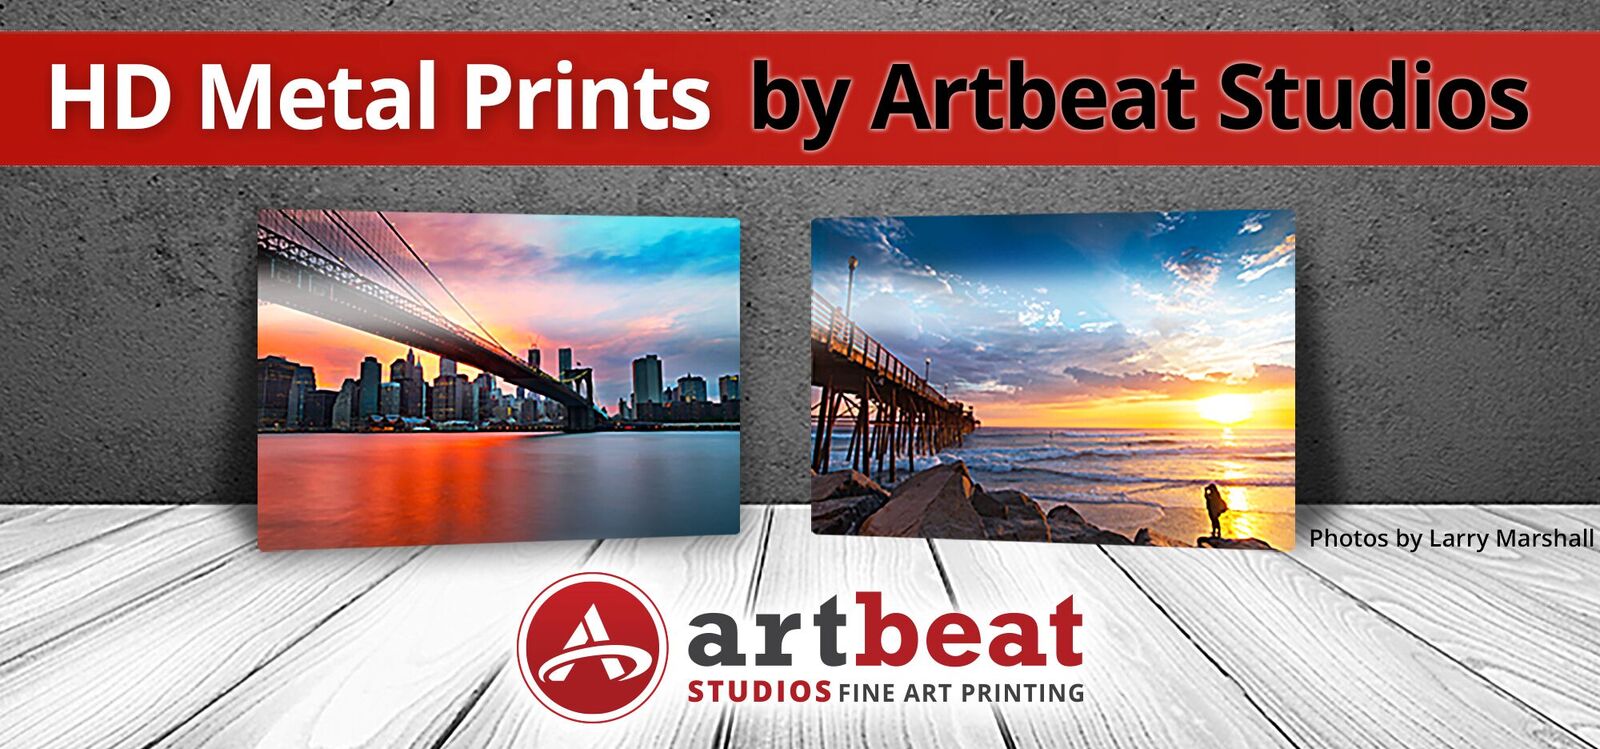 Top Tips for Getting Professional Prints of Your Photos